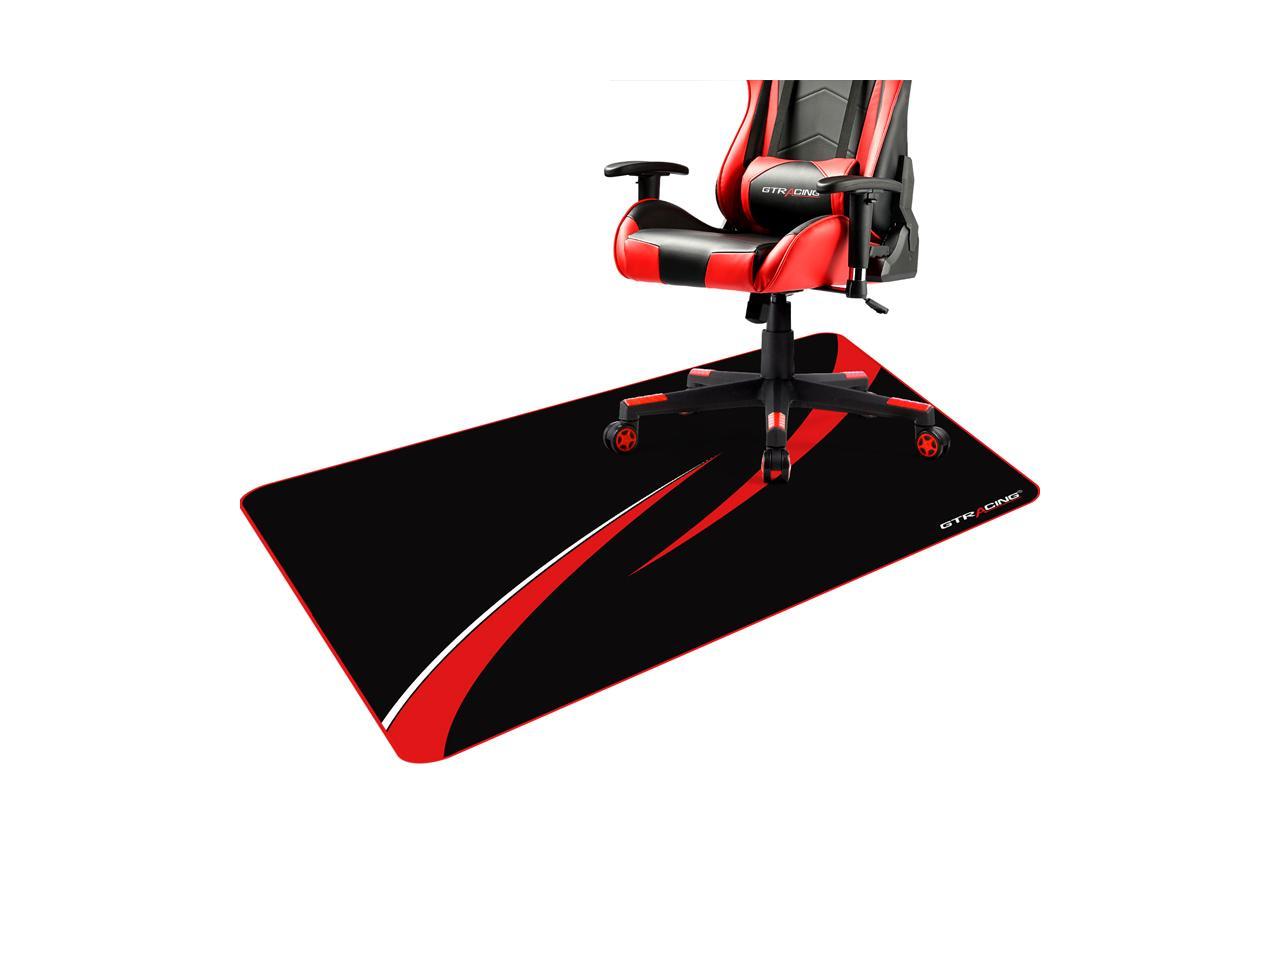 GTRACING Gaming Chair Mat for Hardwood Floor 43 x 35inch